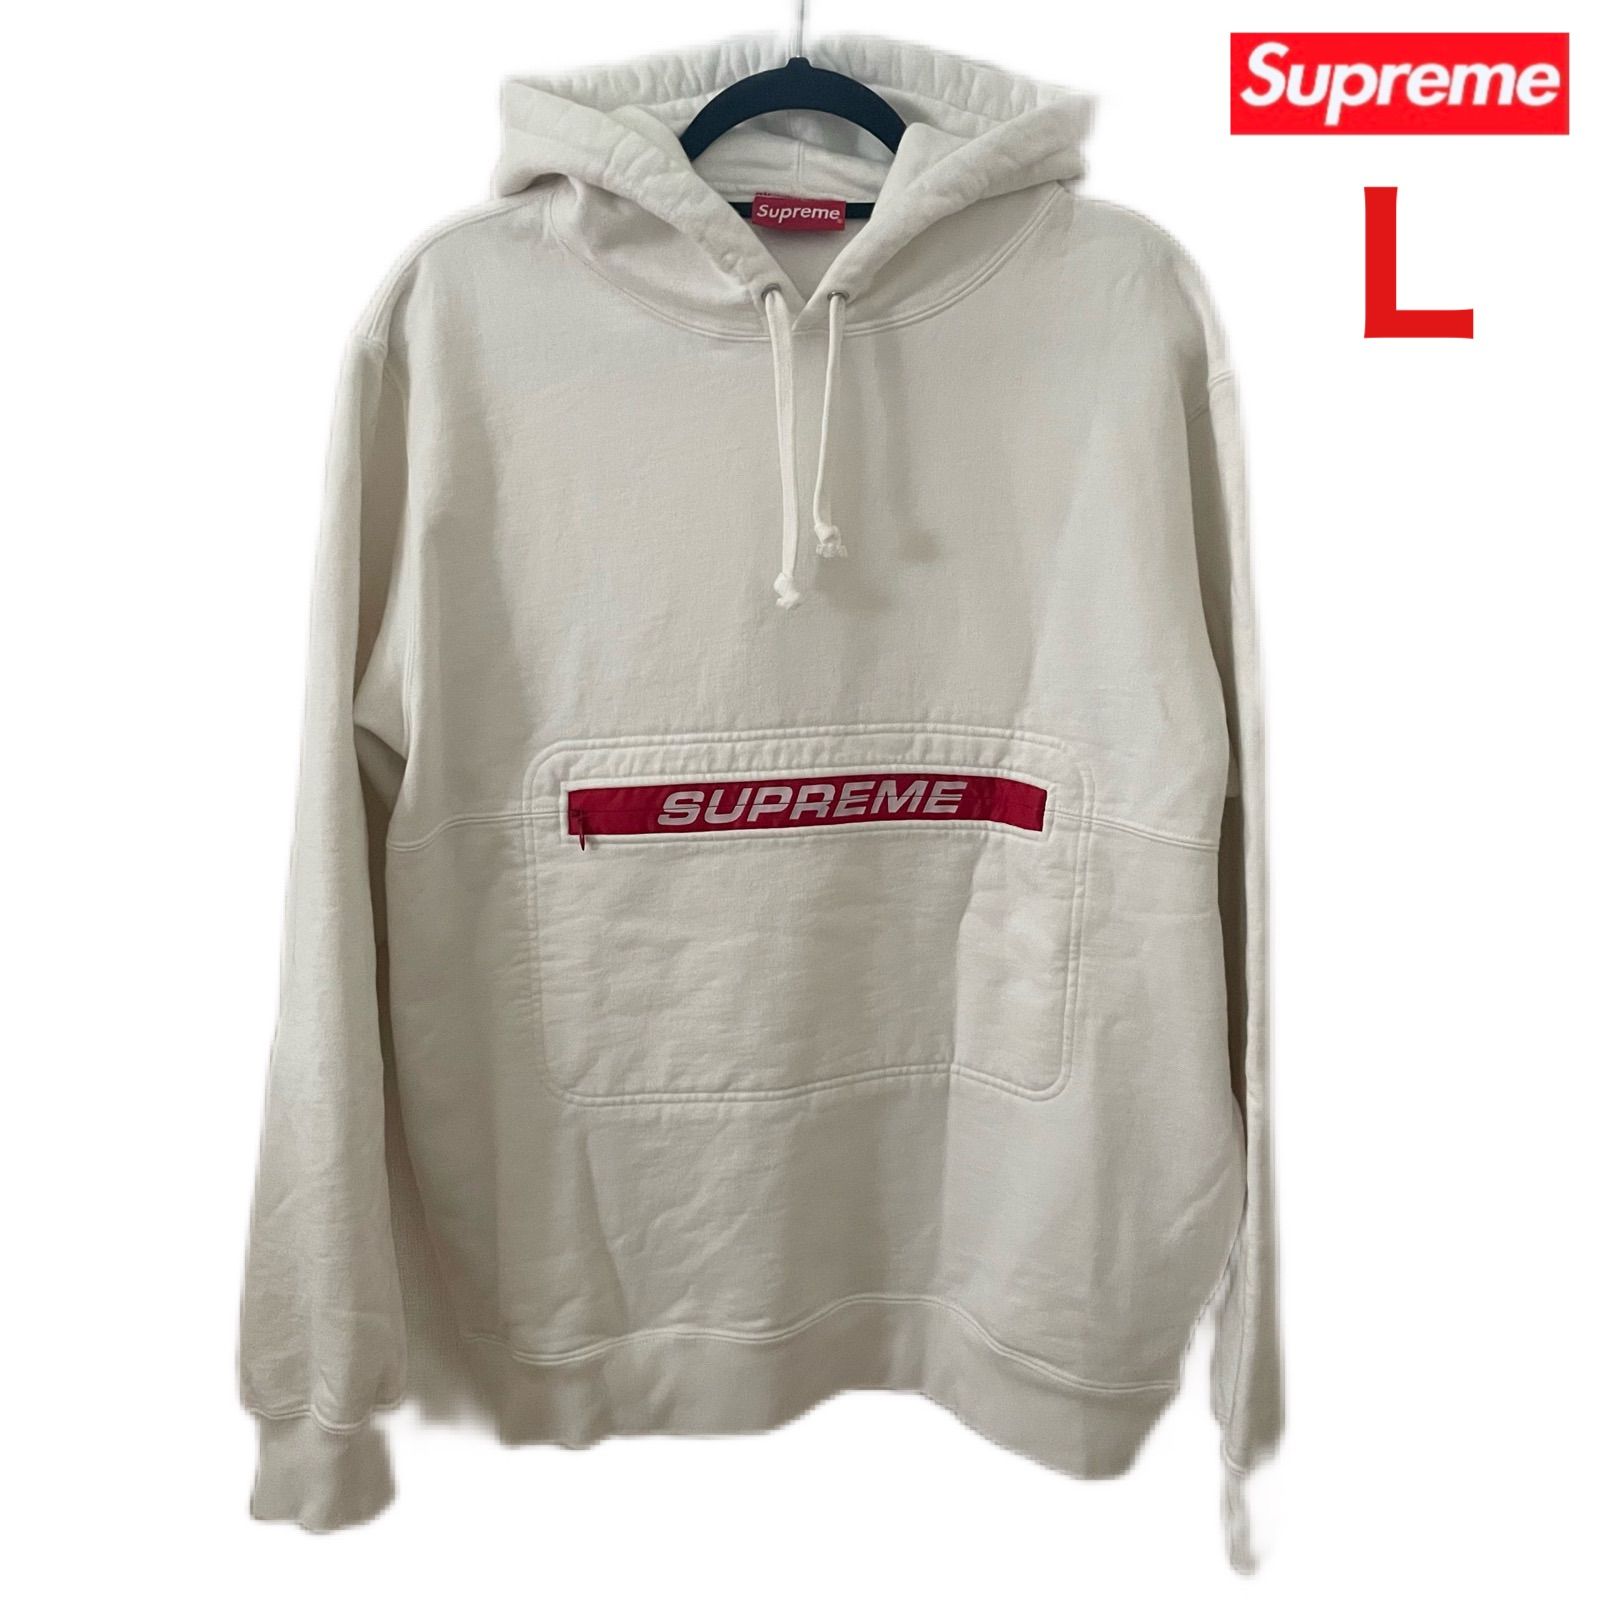 Supreme 19ss Zip Pouch Hooded Sweatshirt | www.agb.md